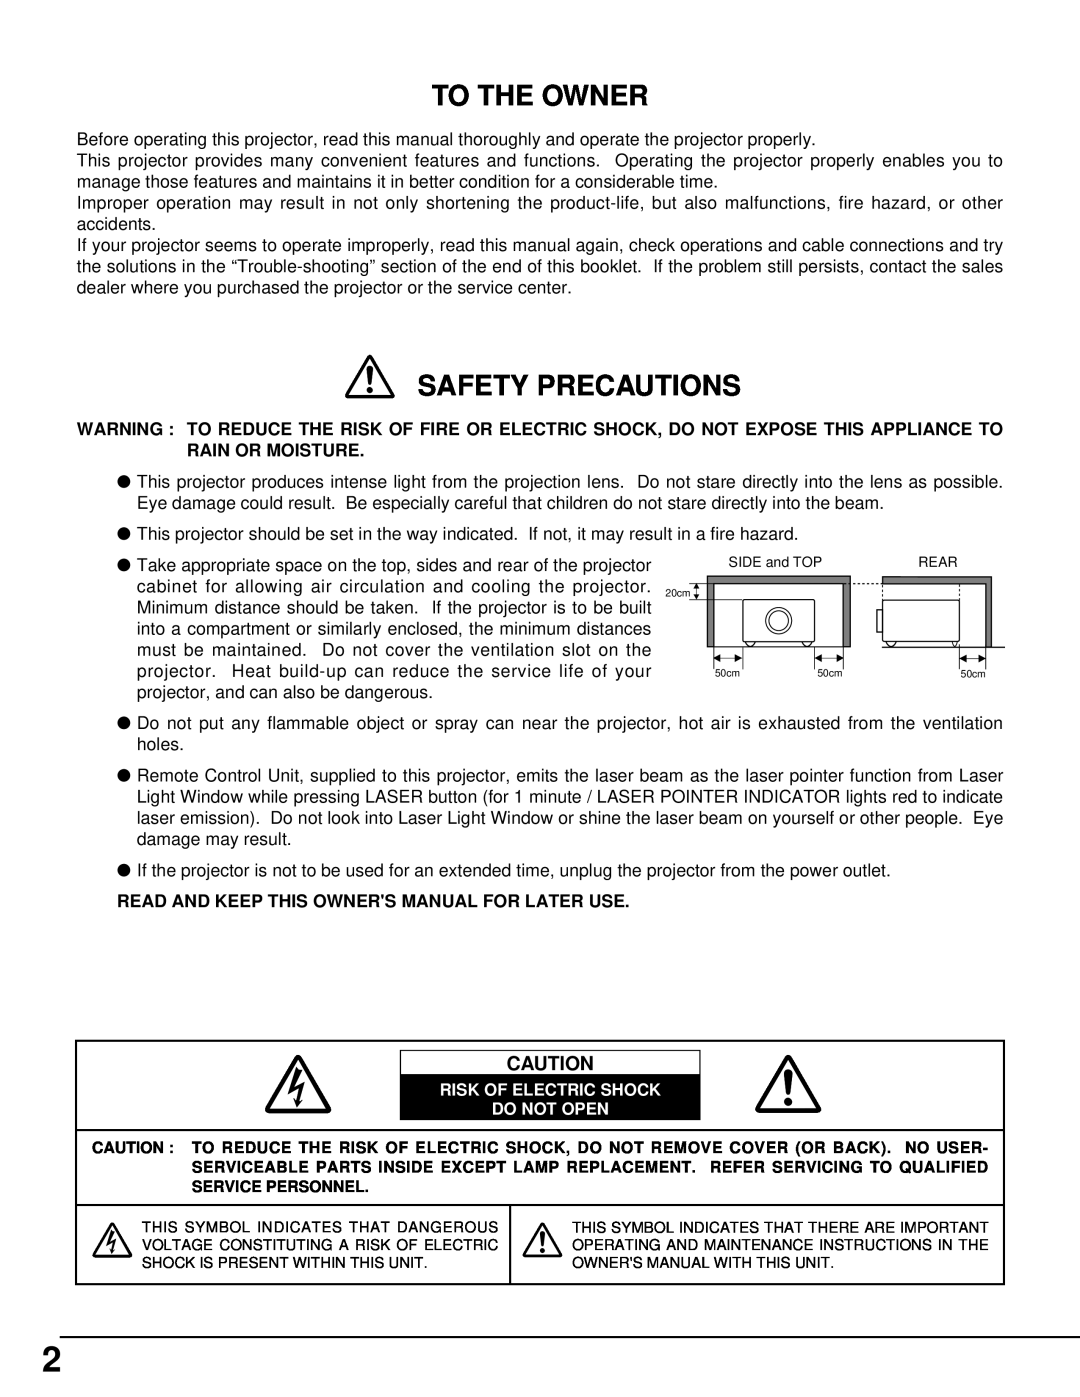 Eiki LC-X986 instruction manual To The Owner, Safety Precautions 